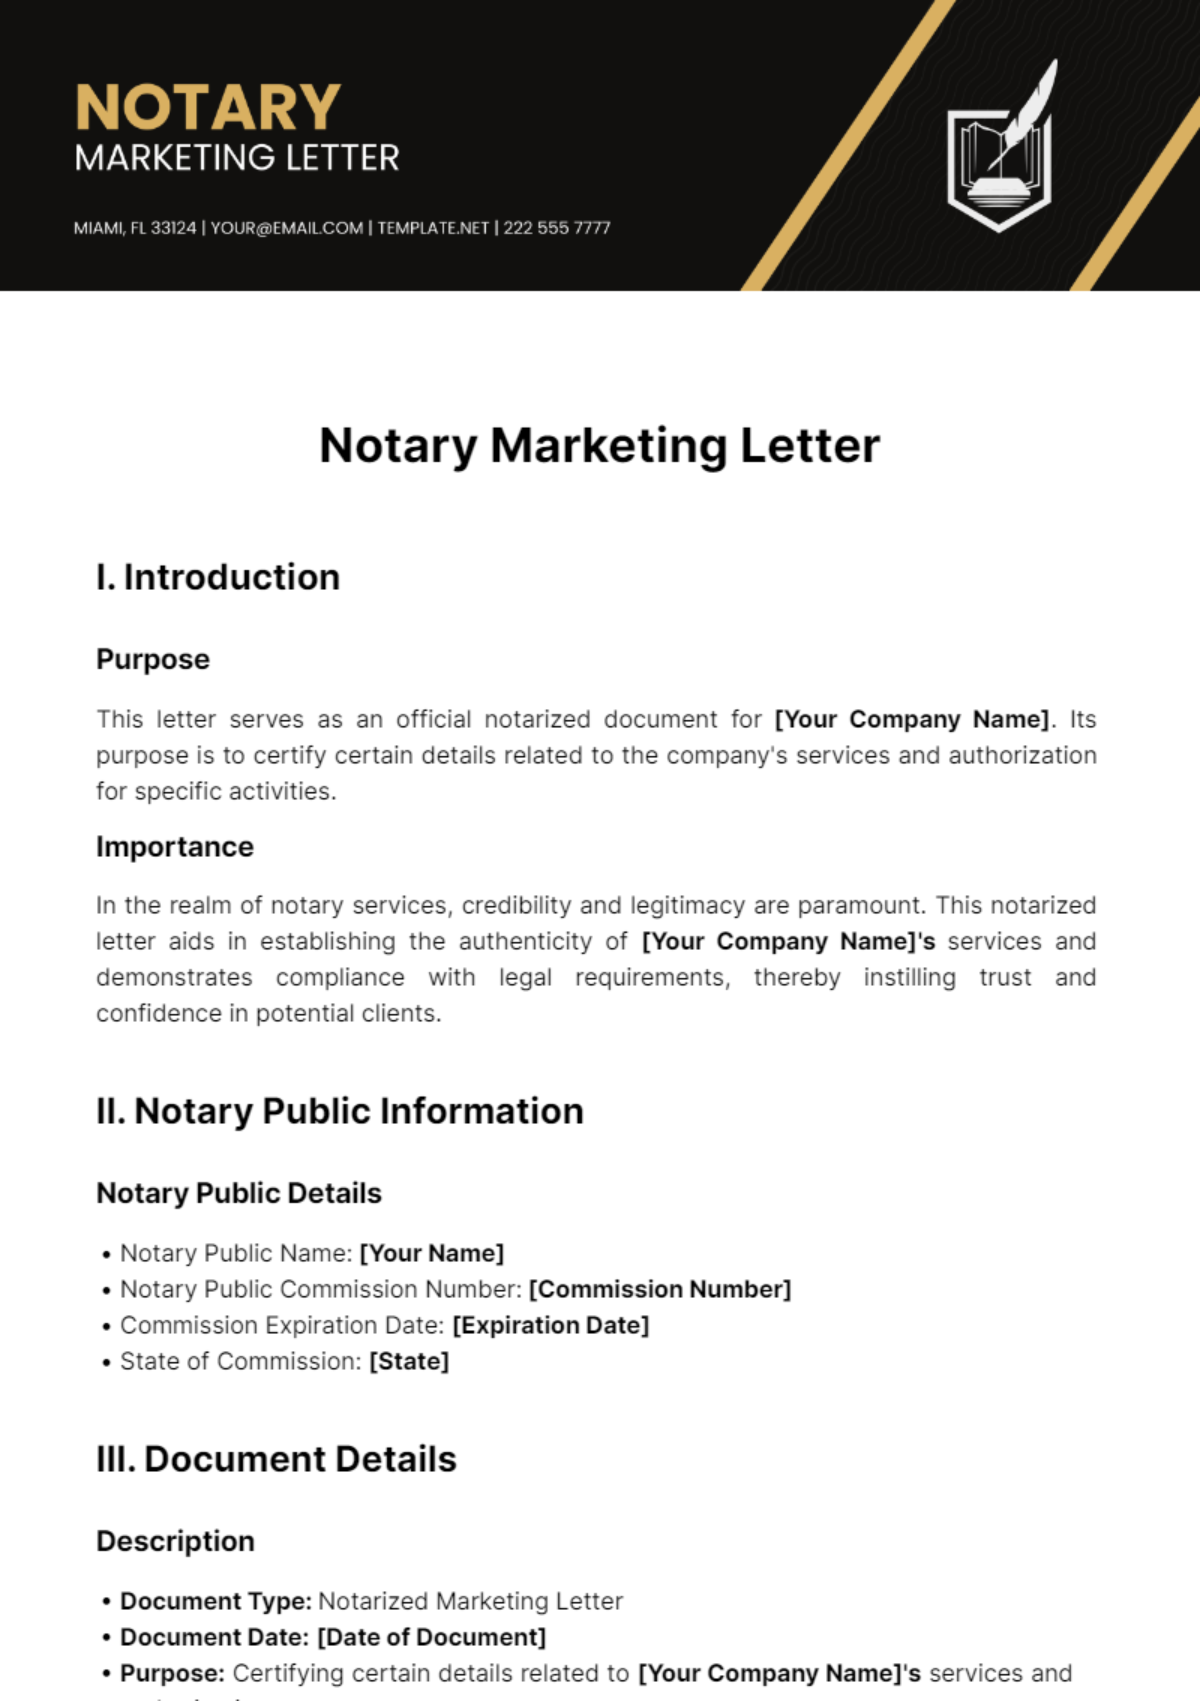 Notary Marketing Letter Template